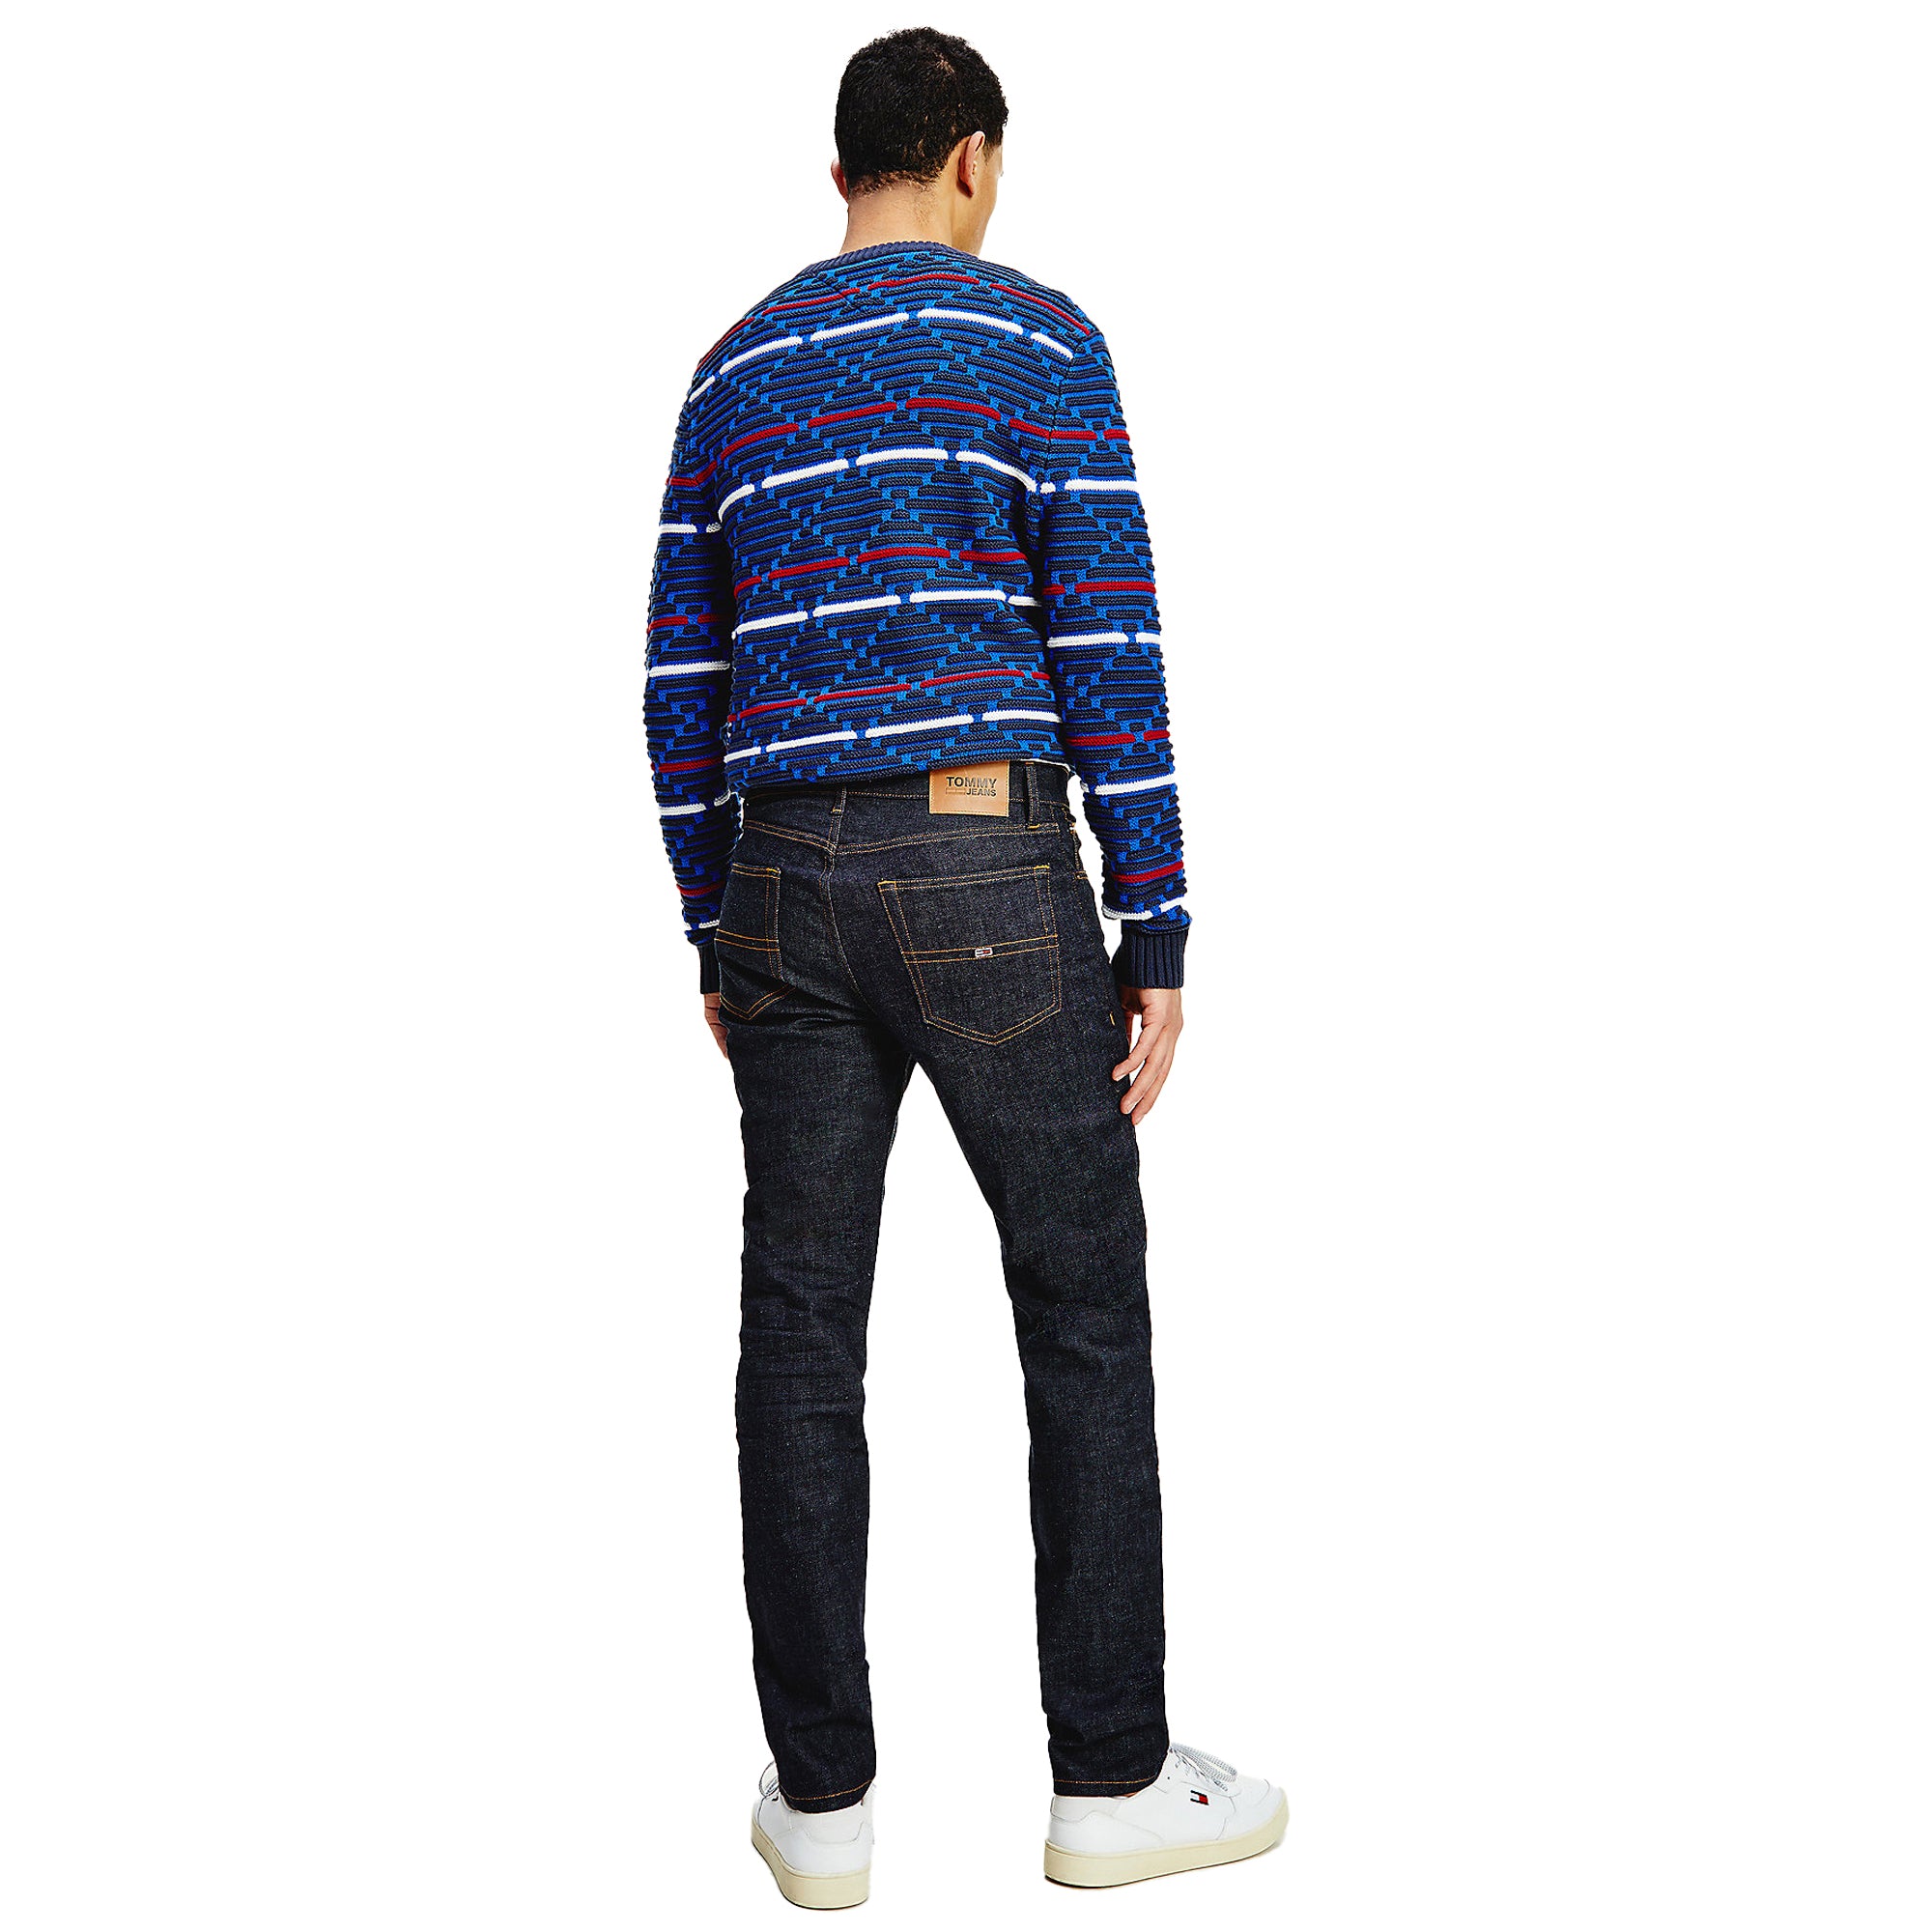 Tommy Jeans Ryan Regular Straight Jeans - Rinse Comfort